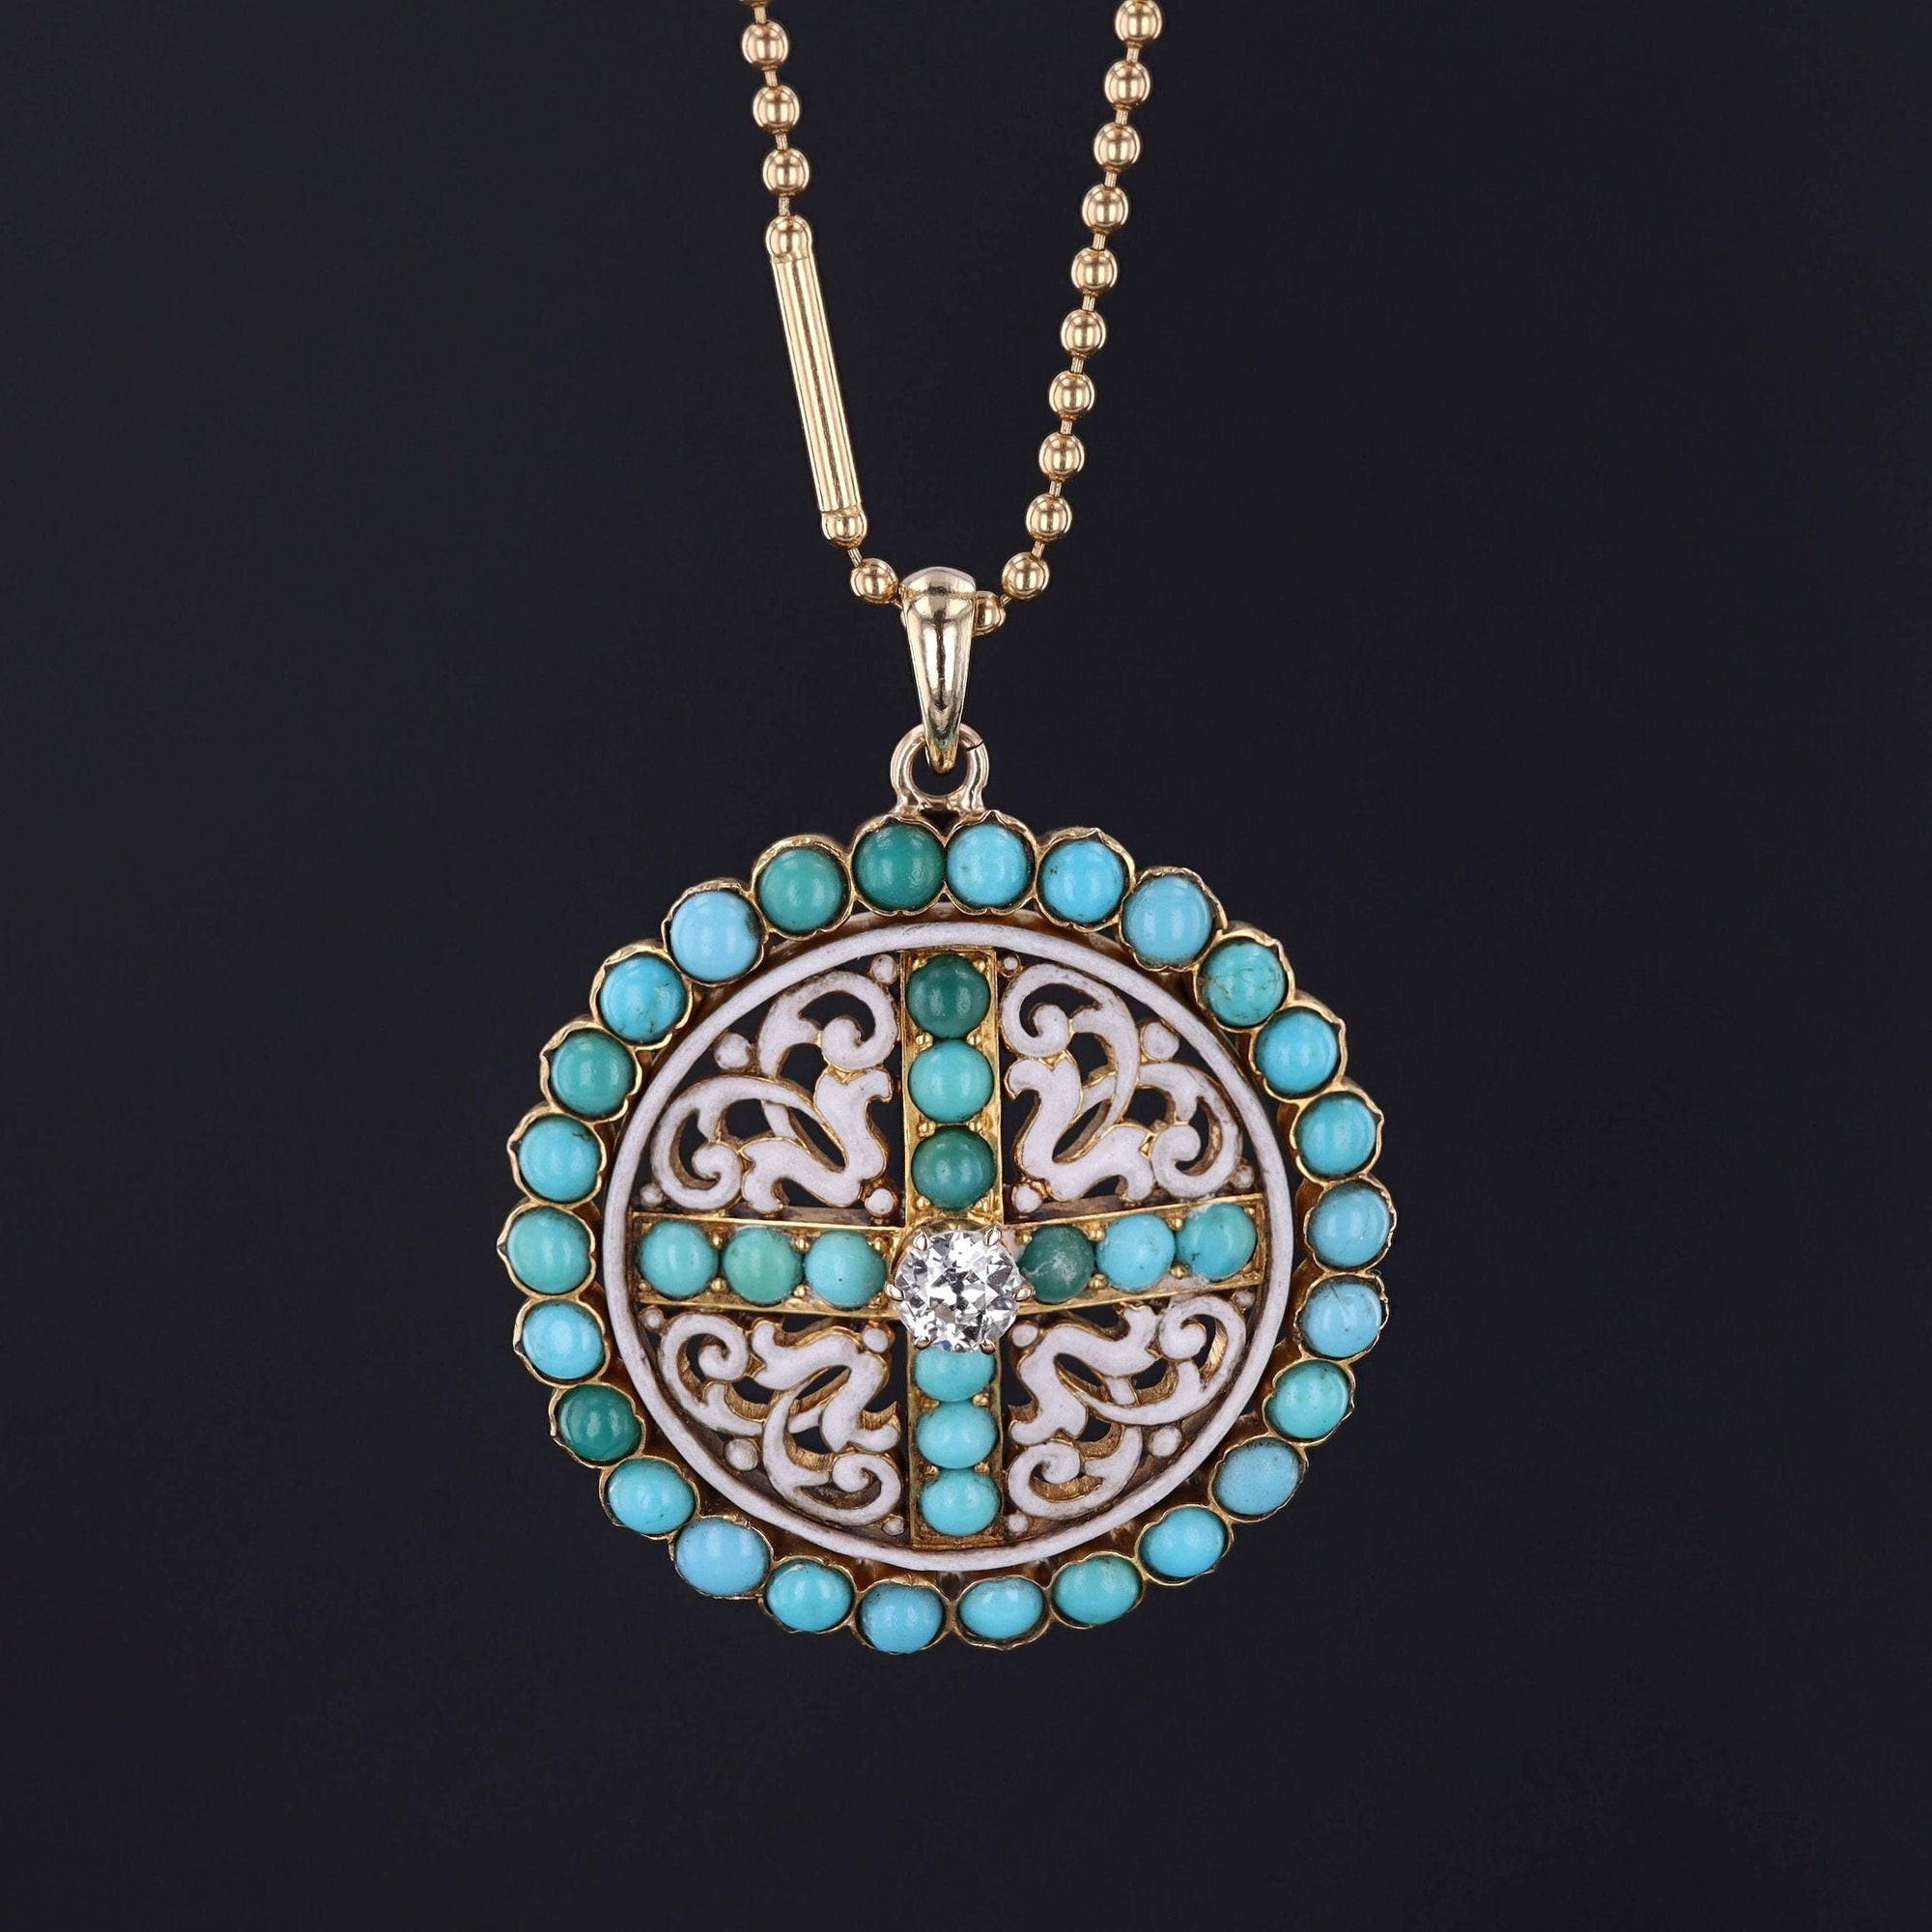 A round, antique pendant necklace with blue turquoise cabochons and a magnificent diamond set in 14k gold among flourishes of white enamel.